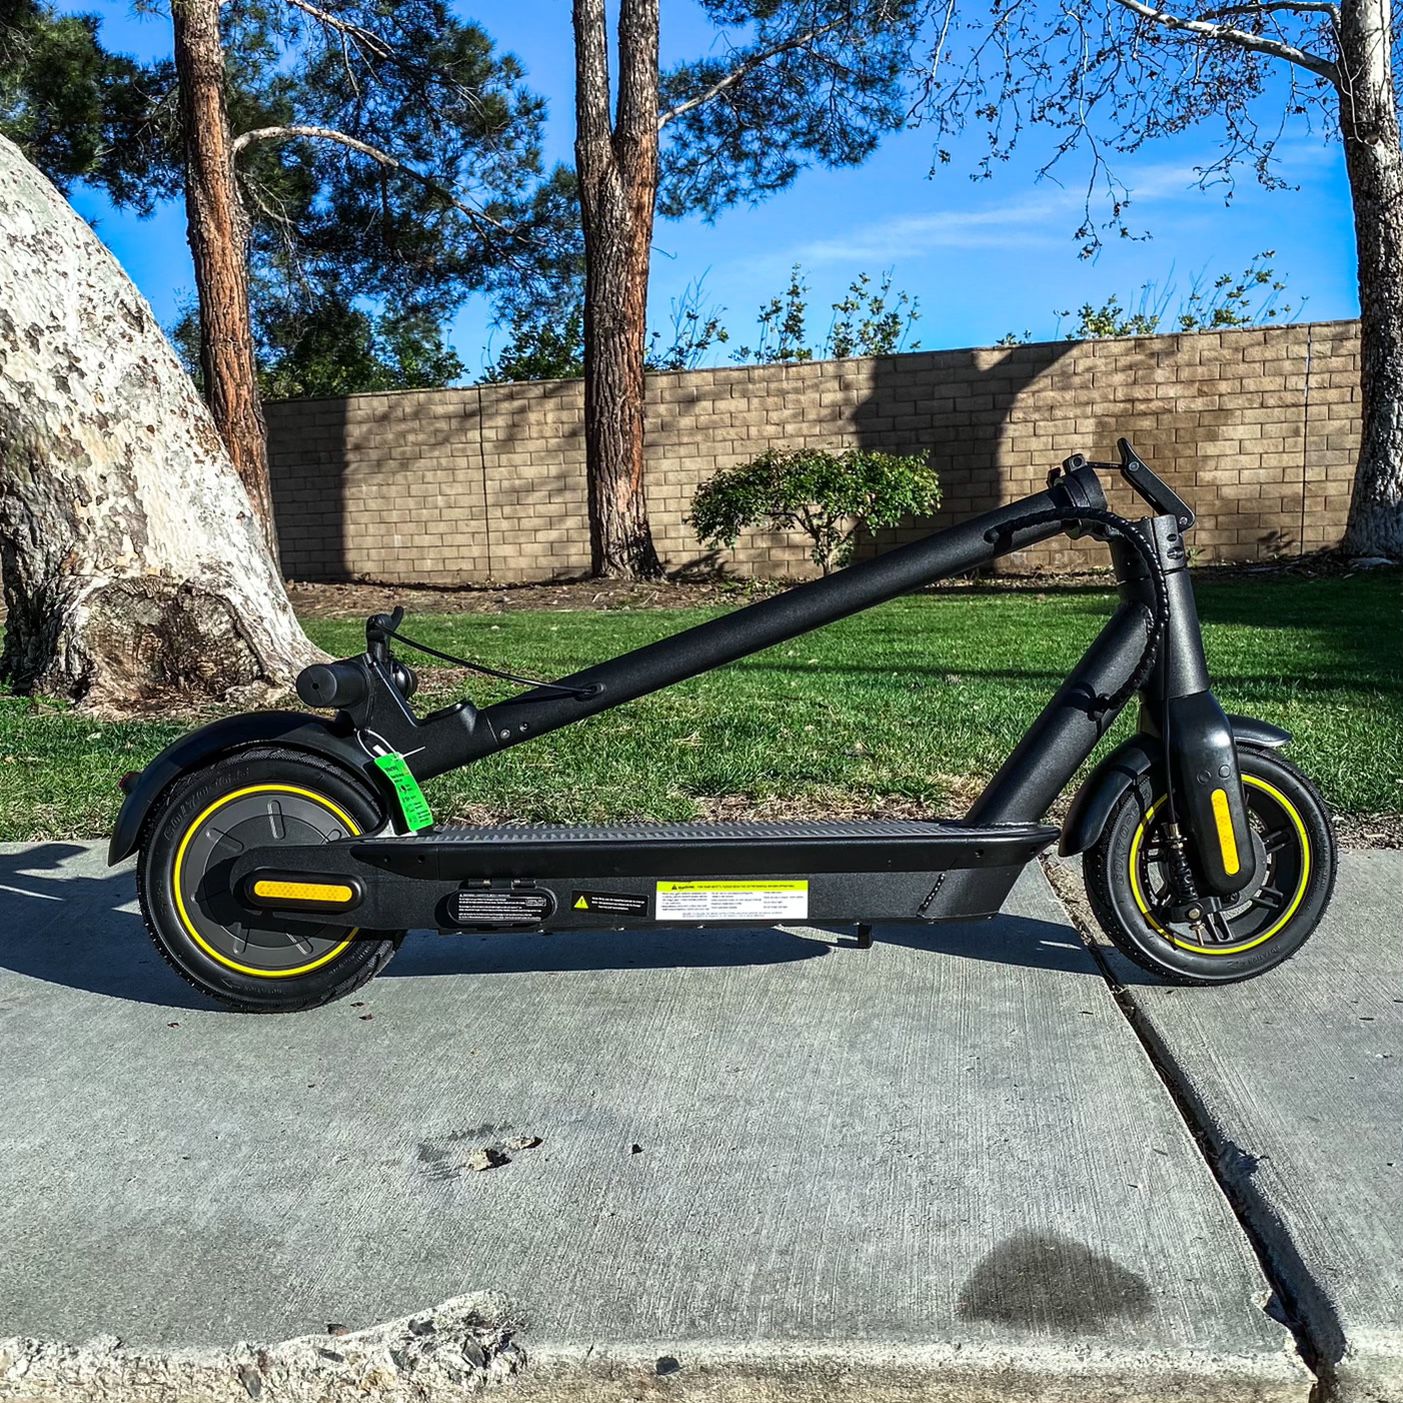 2022 Heavy Duty Pro Electric Scooter/18.6 mph and 39 miles distance/App Control/We Offer Warranty/Brand New In Box (WHOLE SALE PRICING)